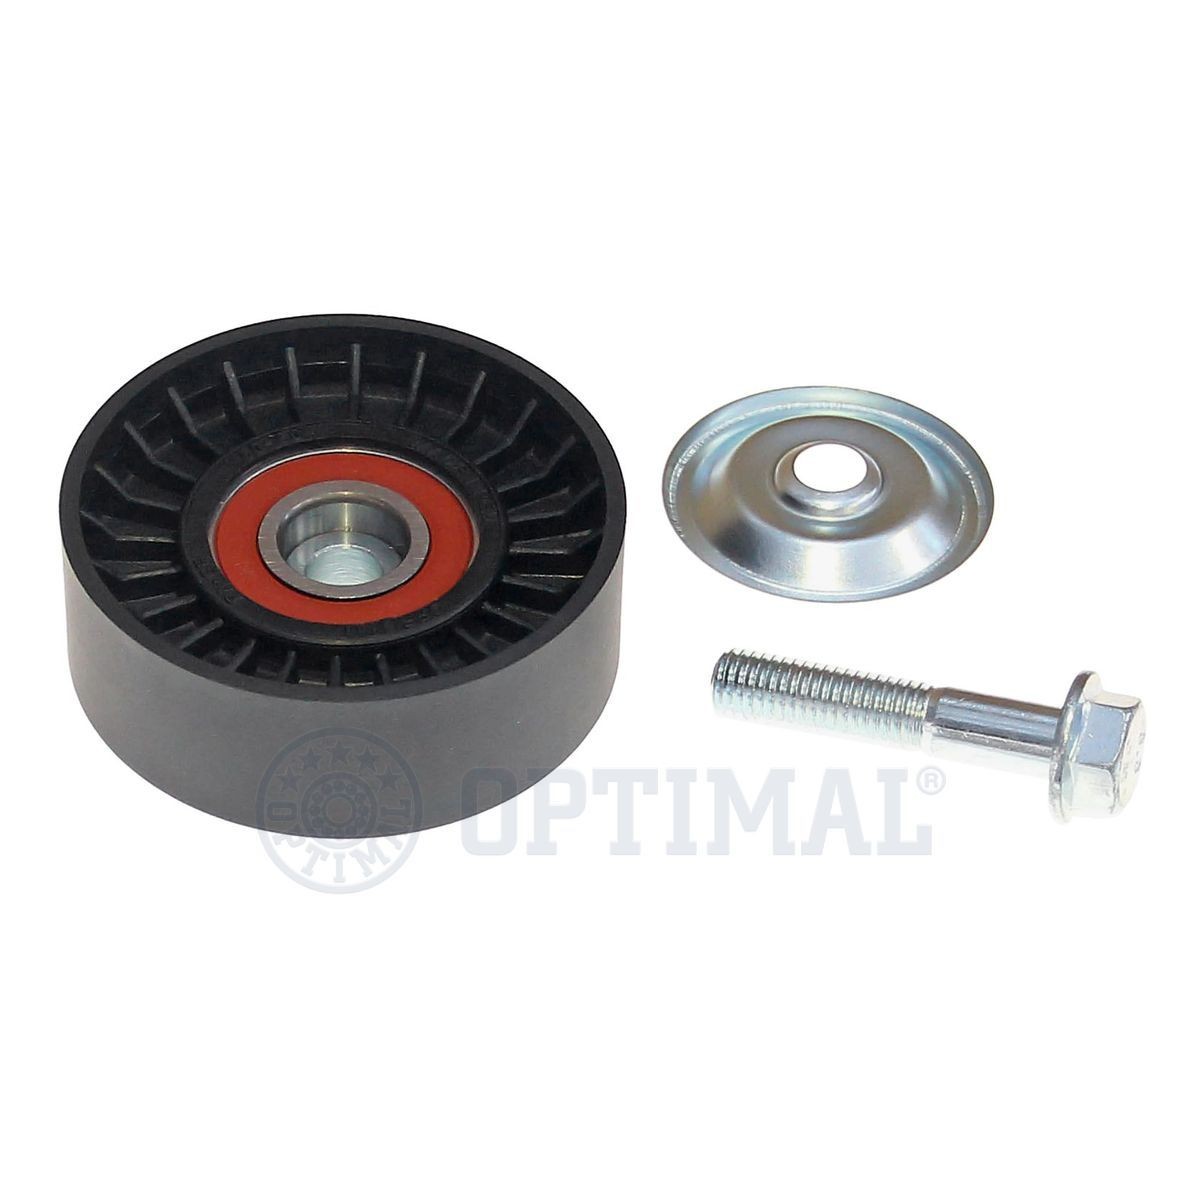 OPTIMAL Deflection guide pulley v ribbed belt AUDI A3 Convertible (8P7) new 0-N2121